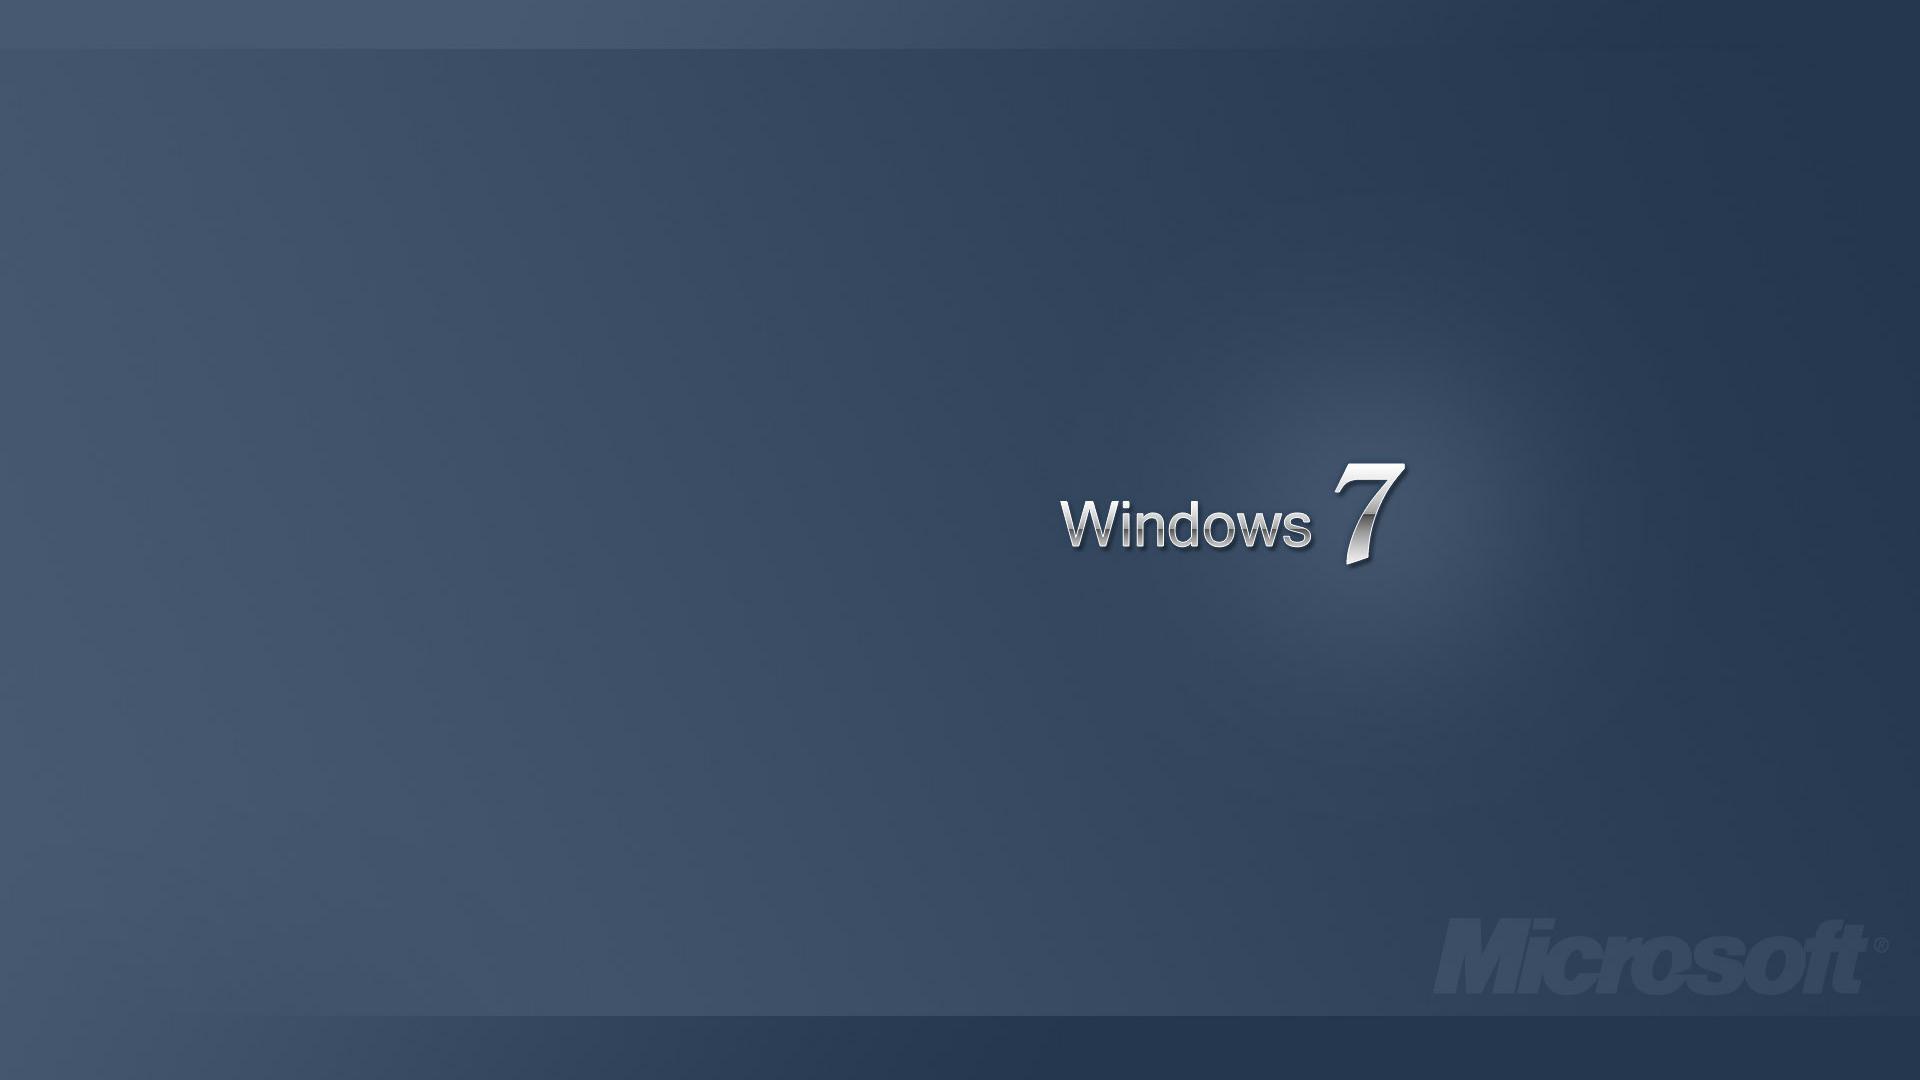 Concise Windows Microsoft Background Widescreen And HD